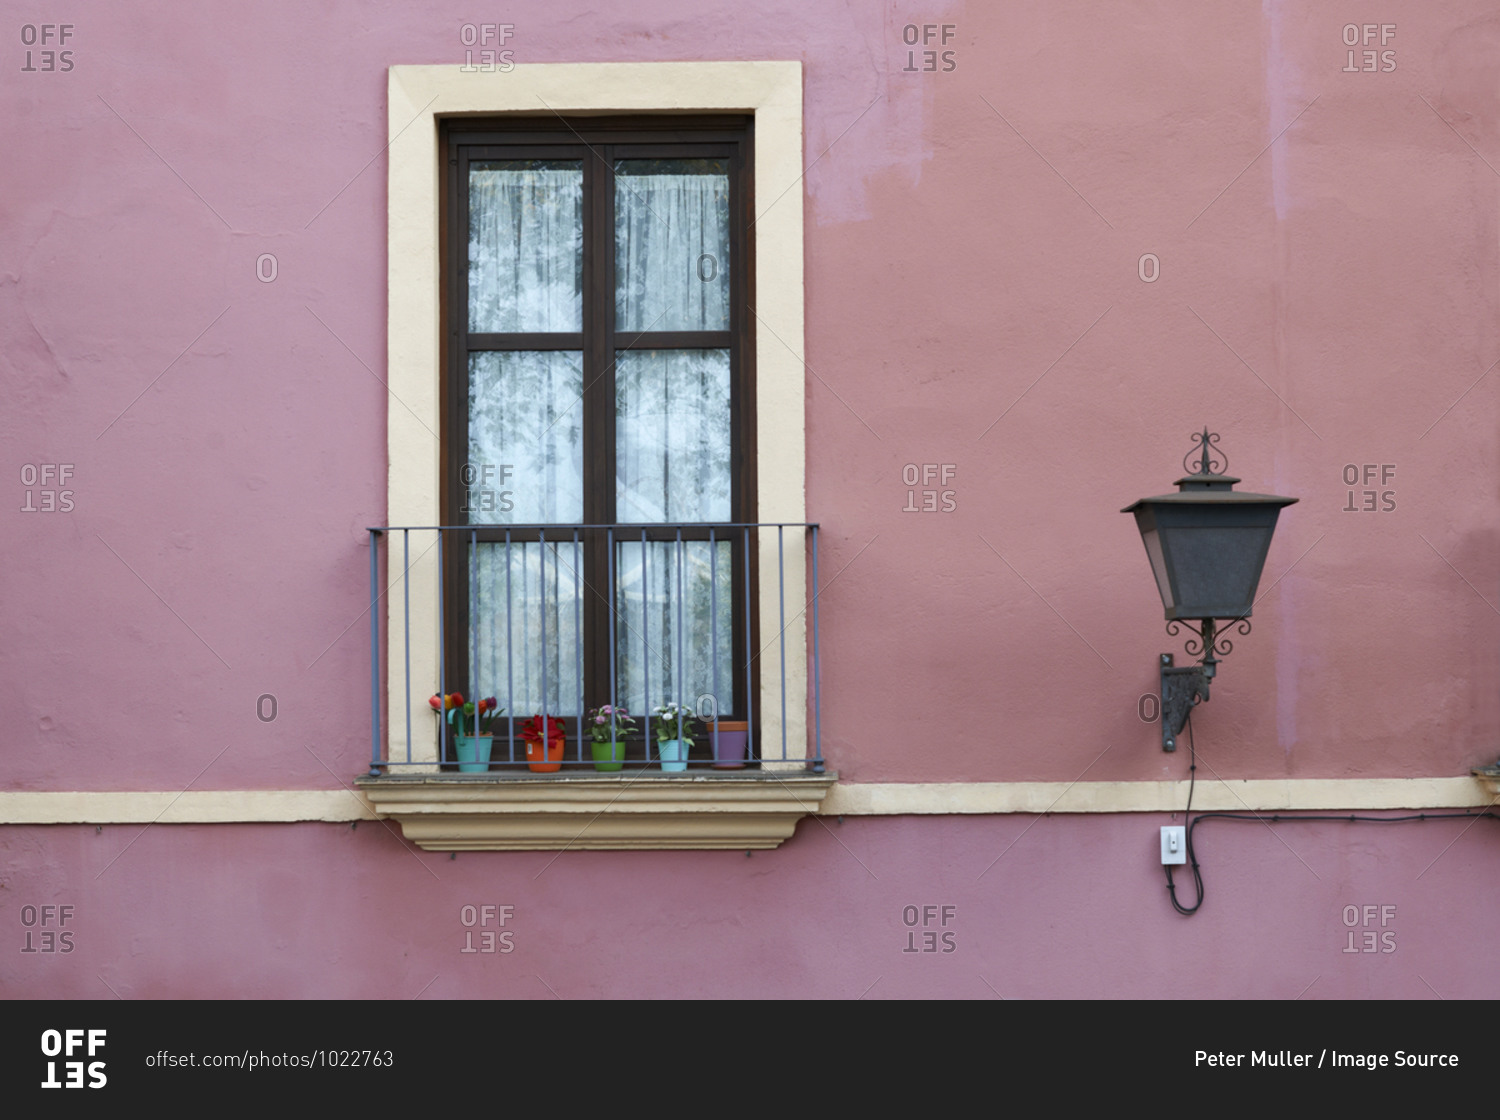 Detail of traditional pink painted house exterior, Seville, Andalusia, Spain